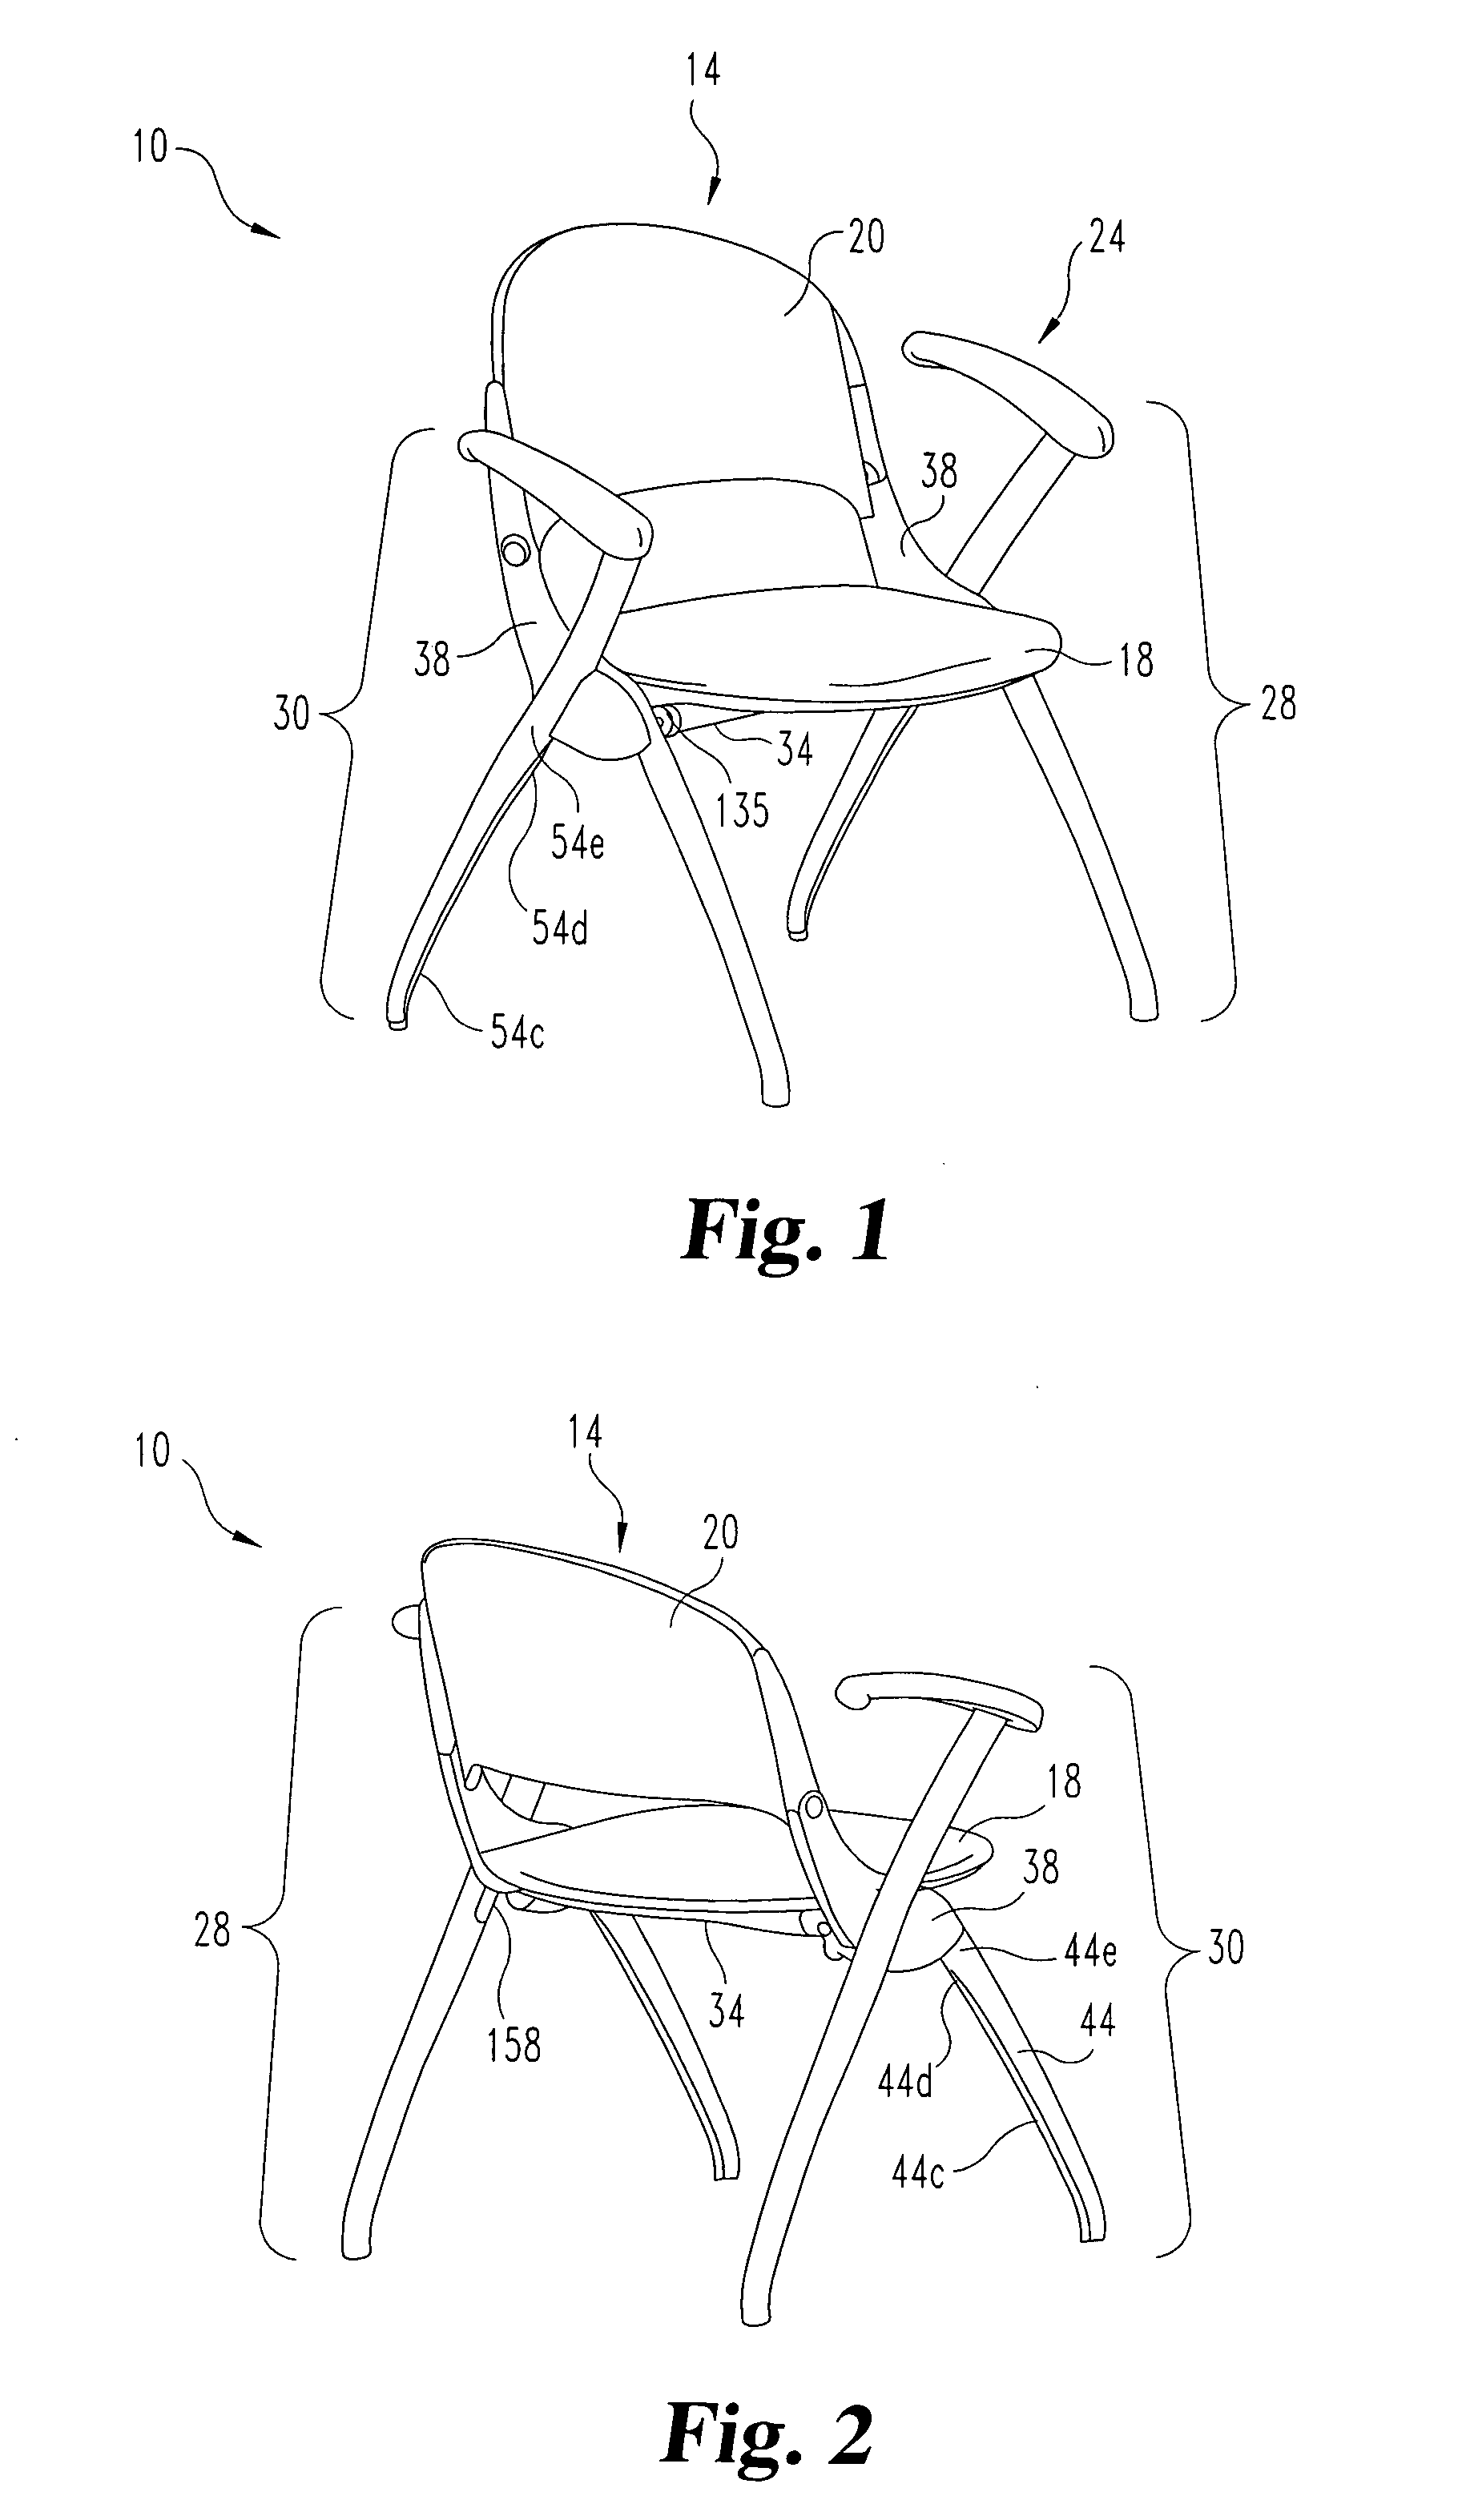 Nestable and stackable chair